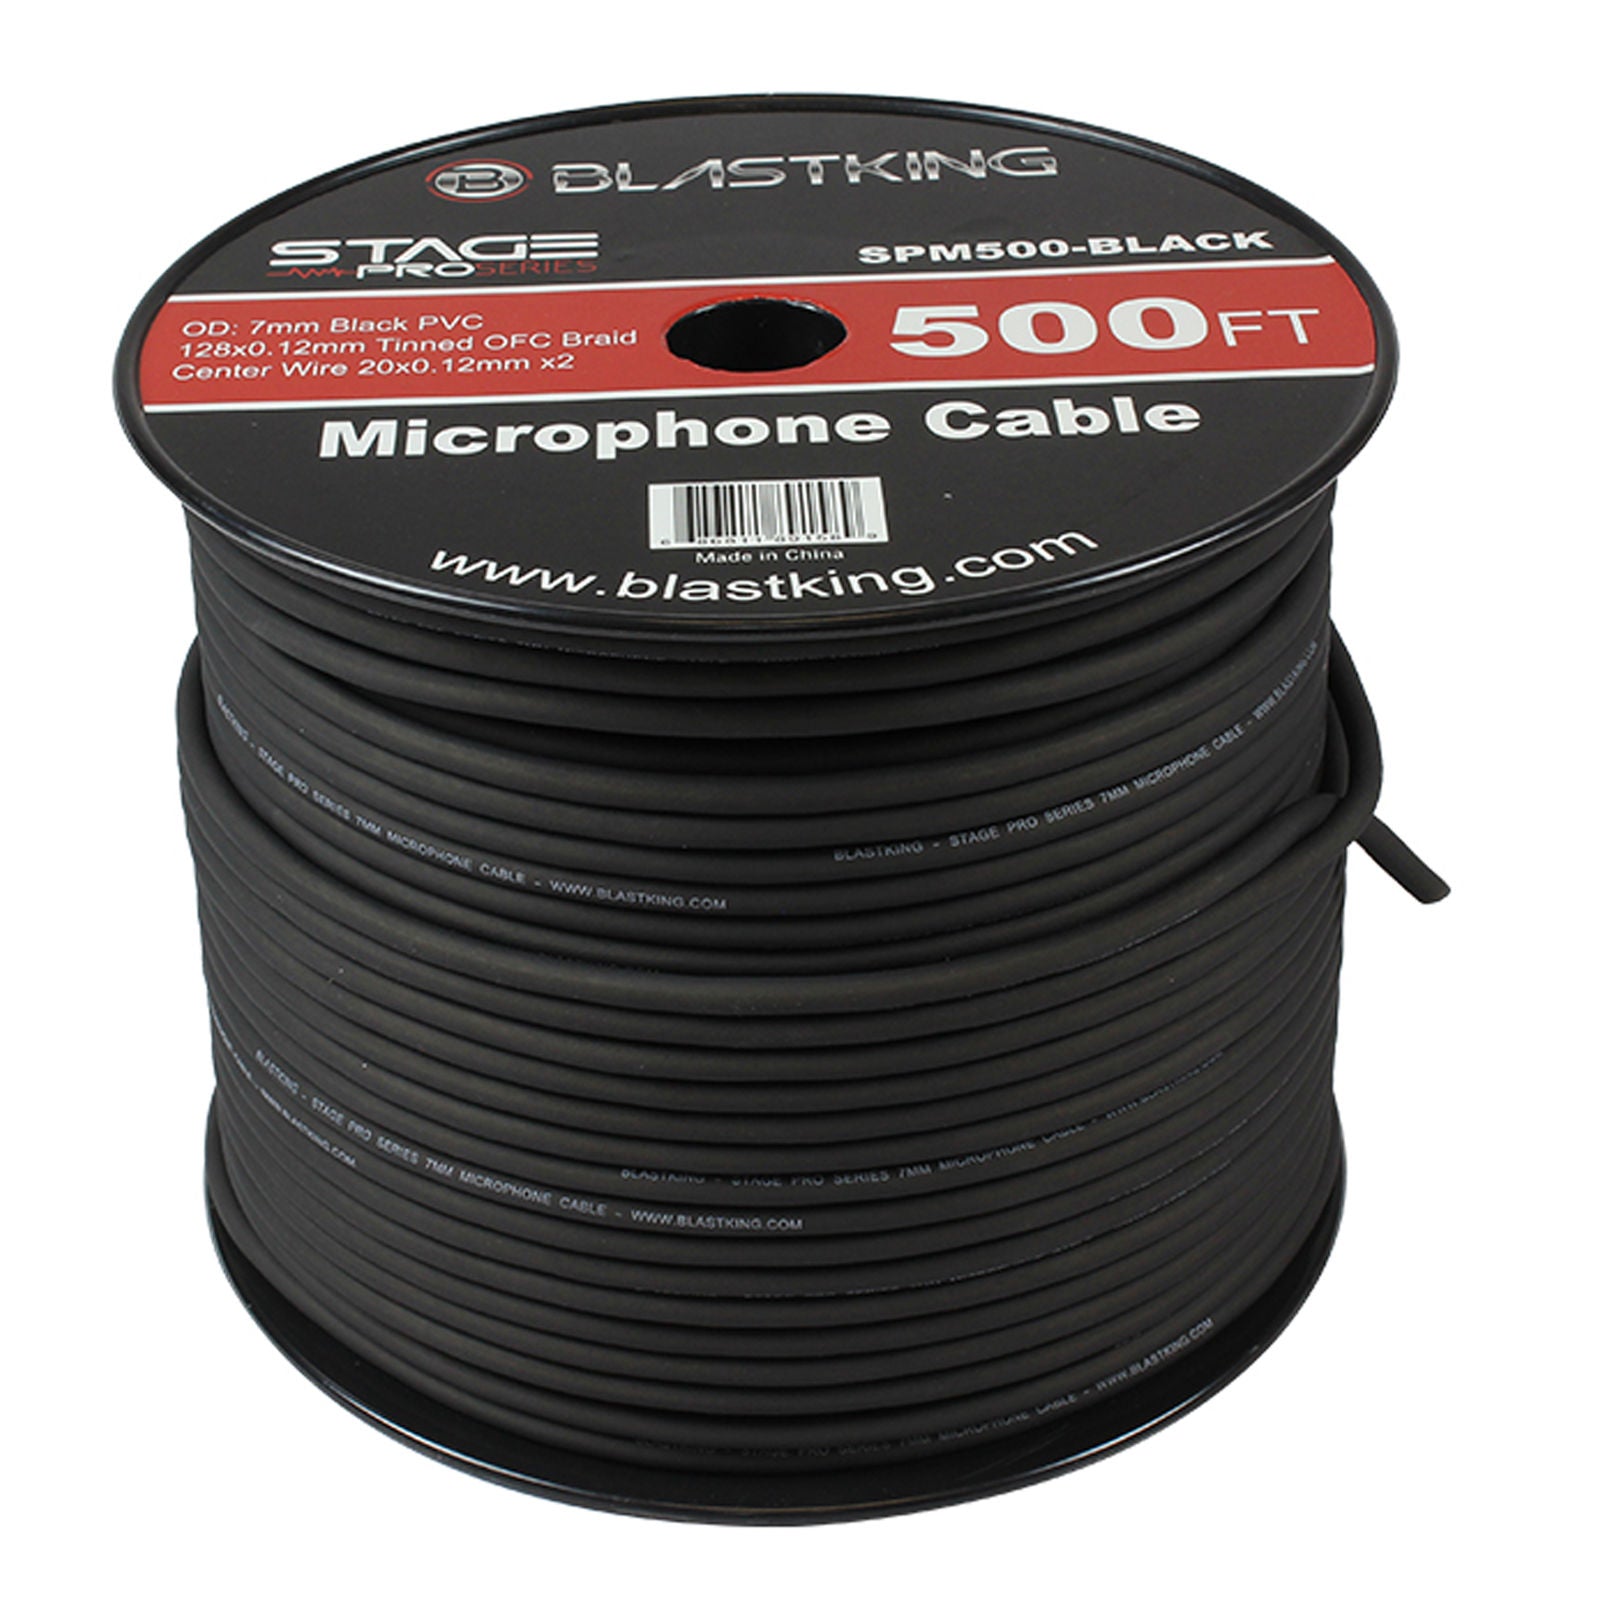 Blastking SPM500-BLACK 2-Conductor OFC Microphone Cable 500 Ft Black